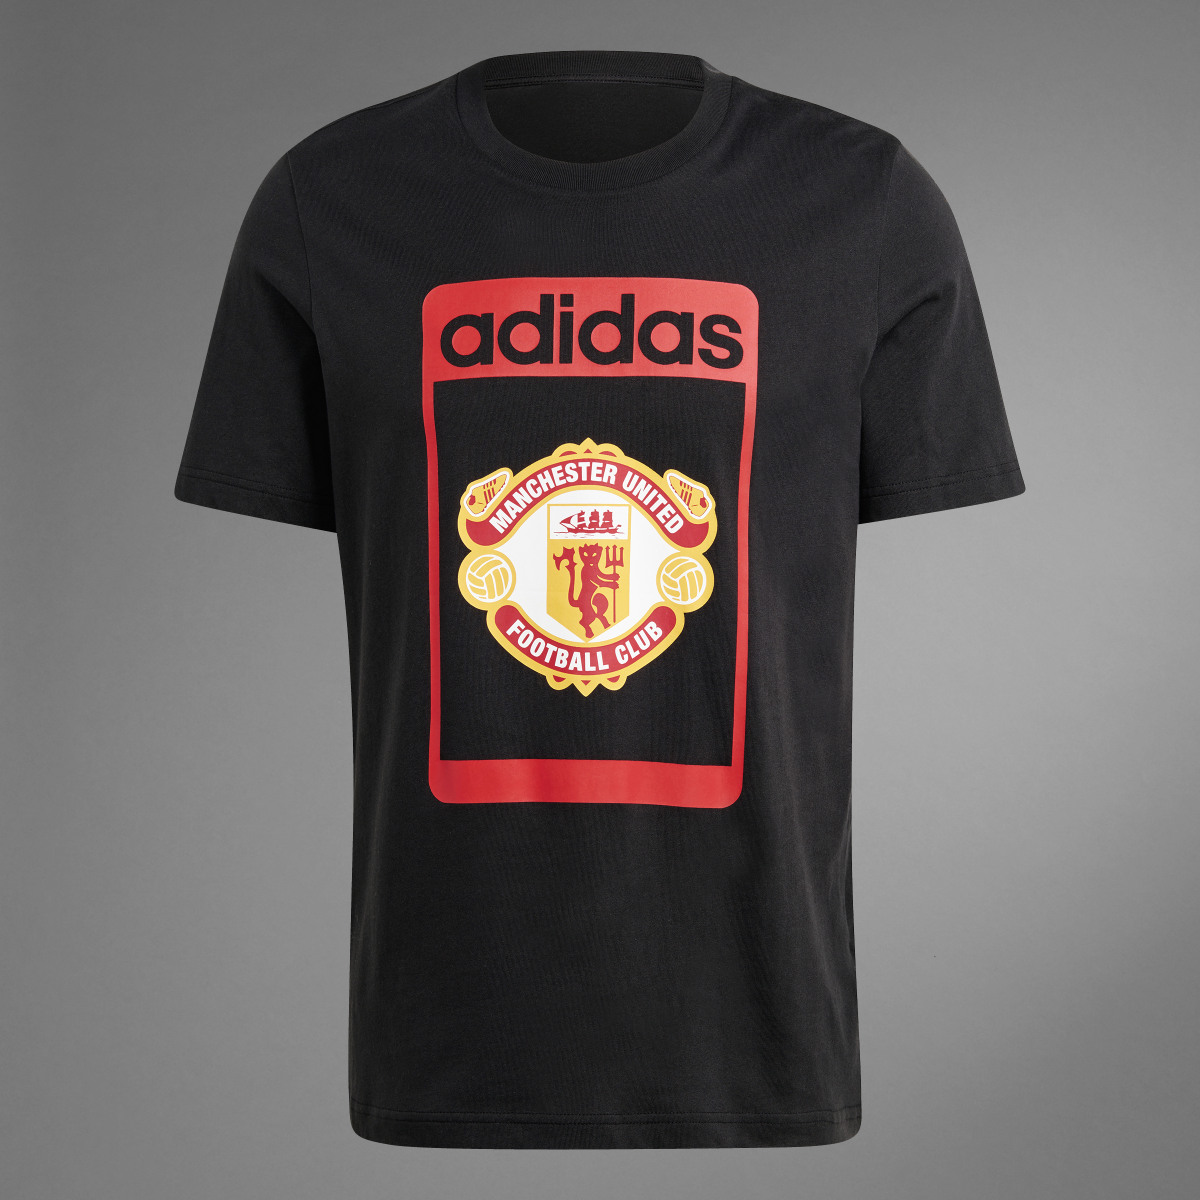 Adidas Manchester United OG Graphic Tee. 10